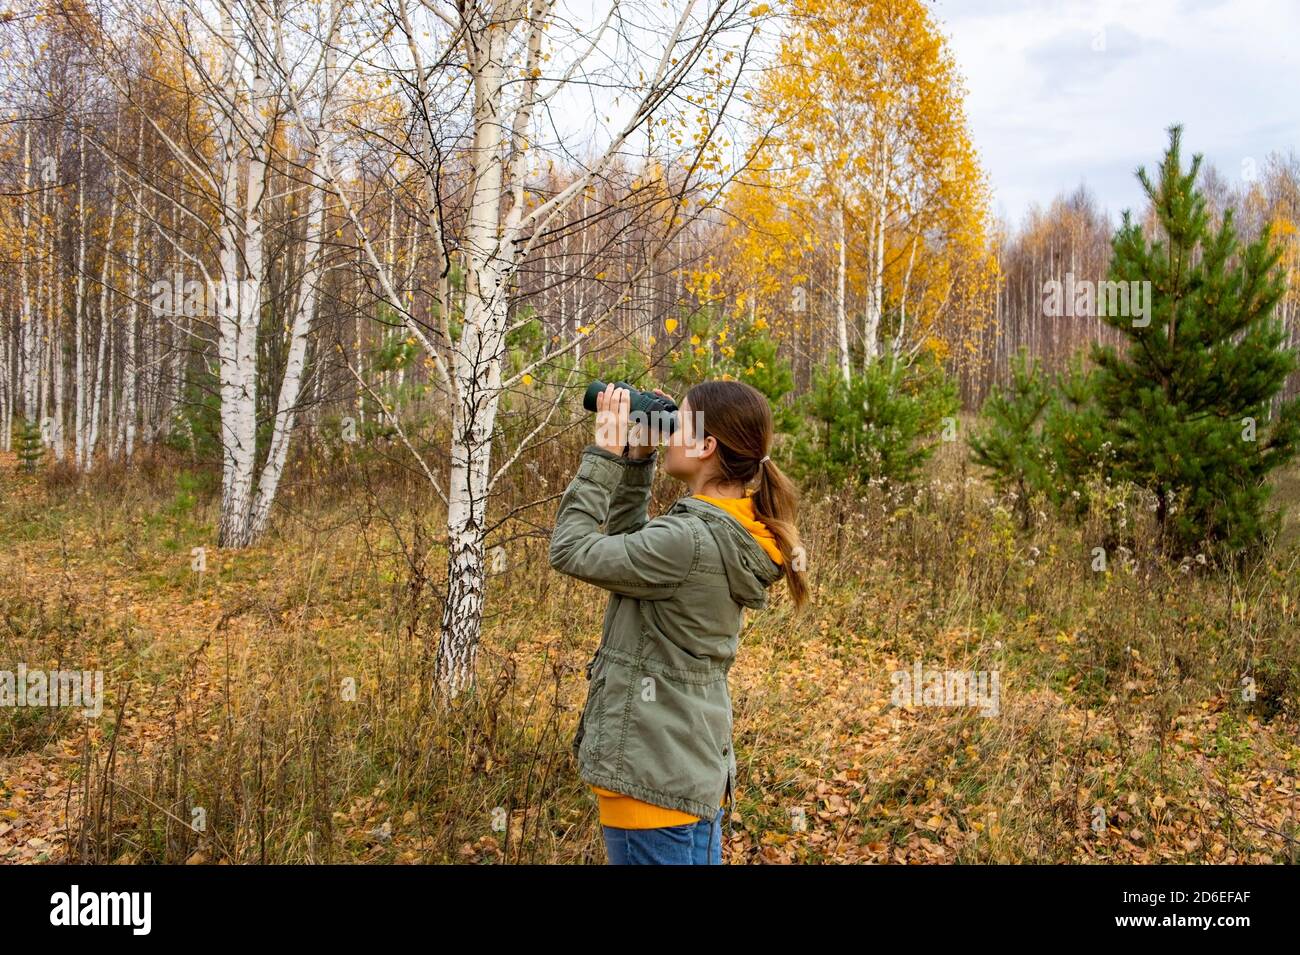 Young woman birdwatcher with binoculars in the autumn forest. Birdwatching, zoology, ecology. Research, observation of animals. Ornithology Stock Photo